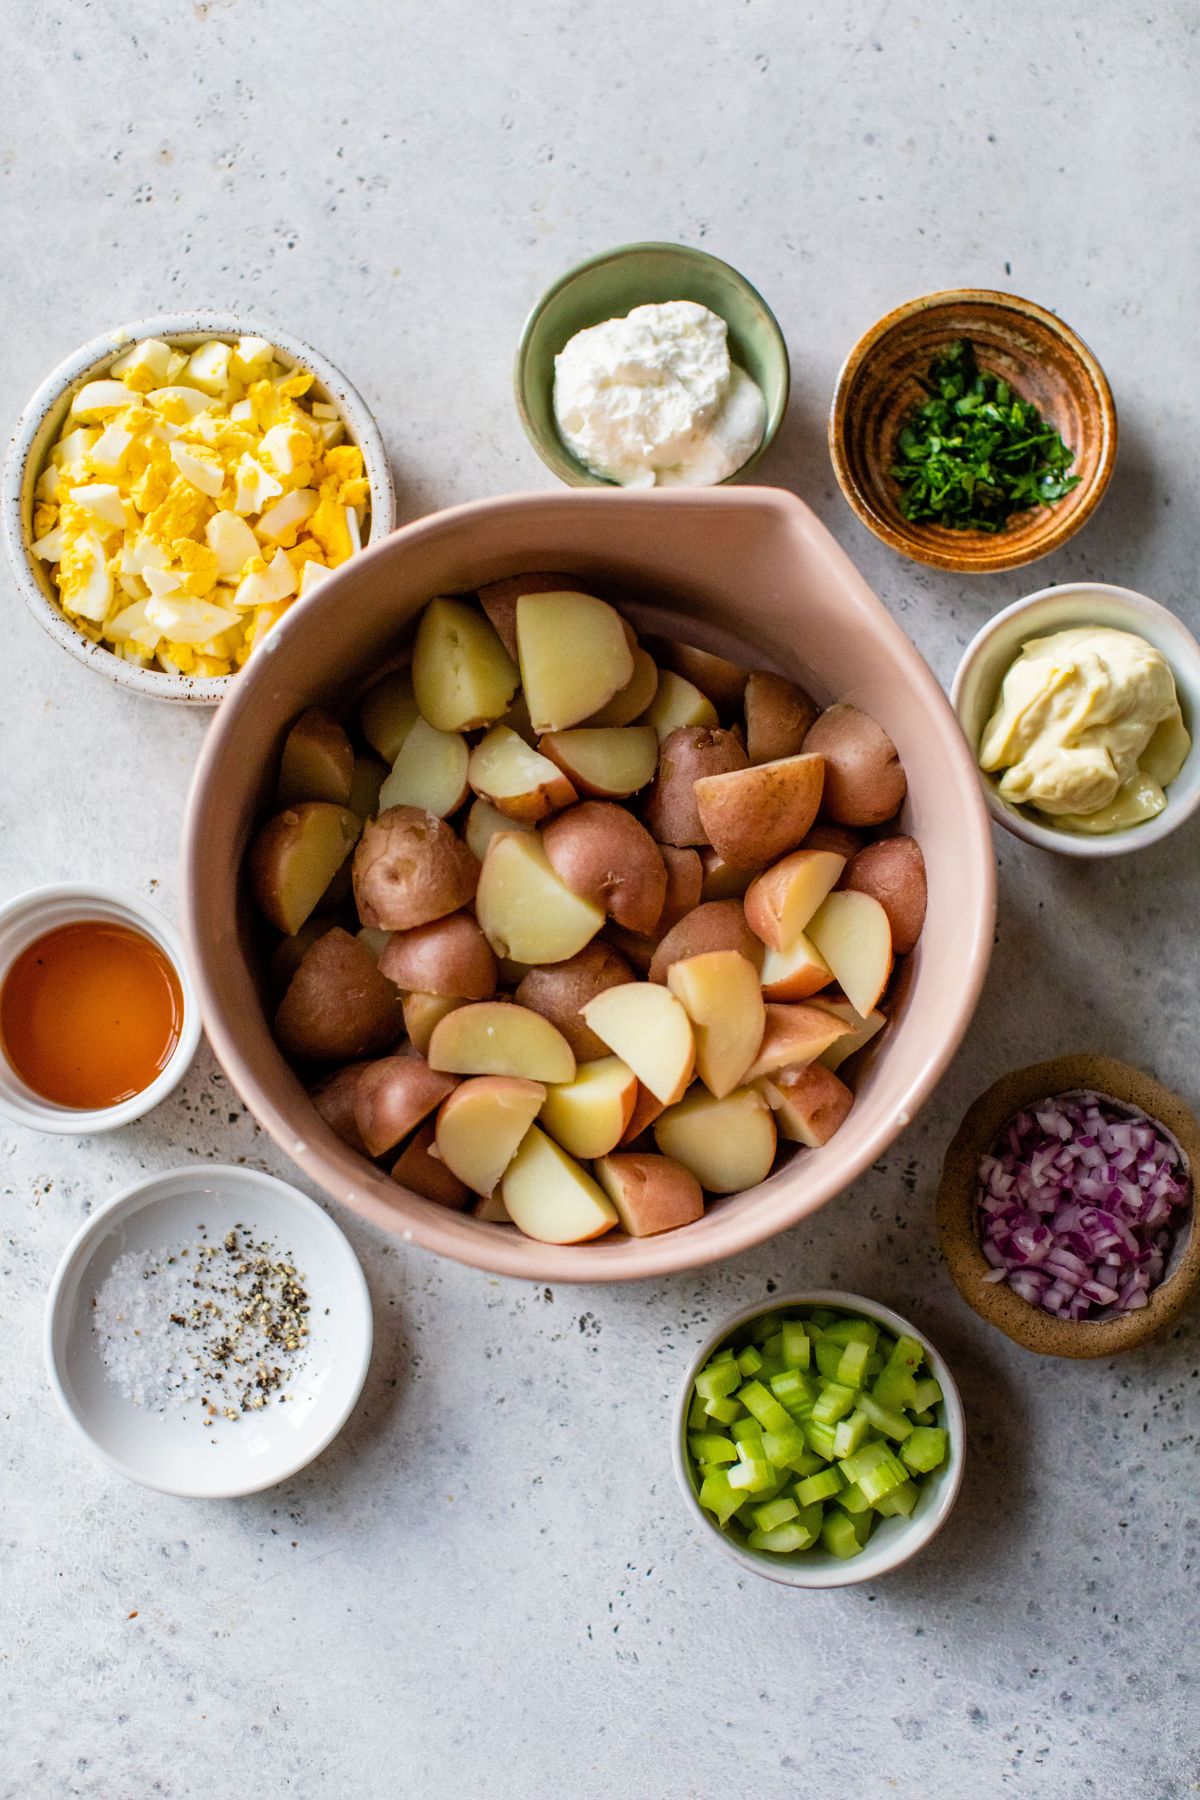 Ingredients for potato salad divided into small bowls.